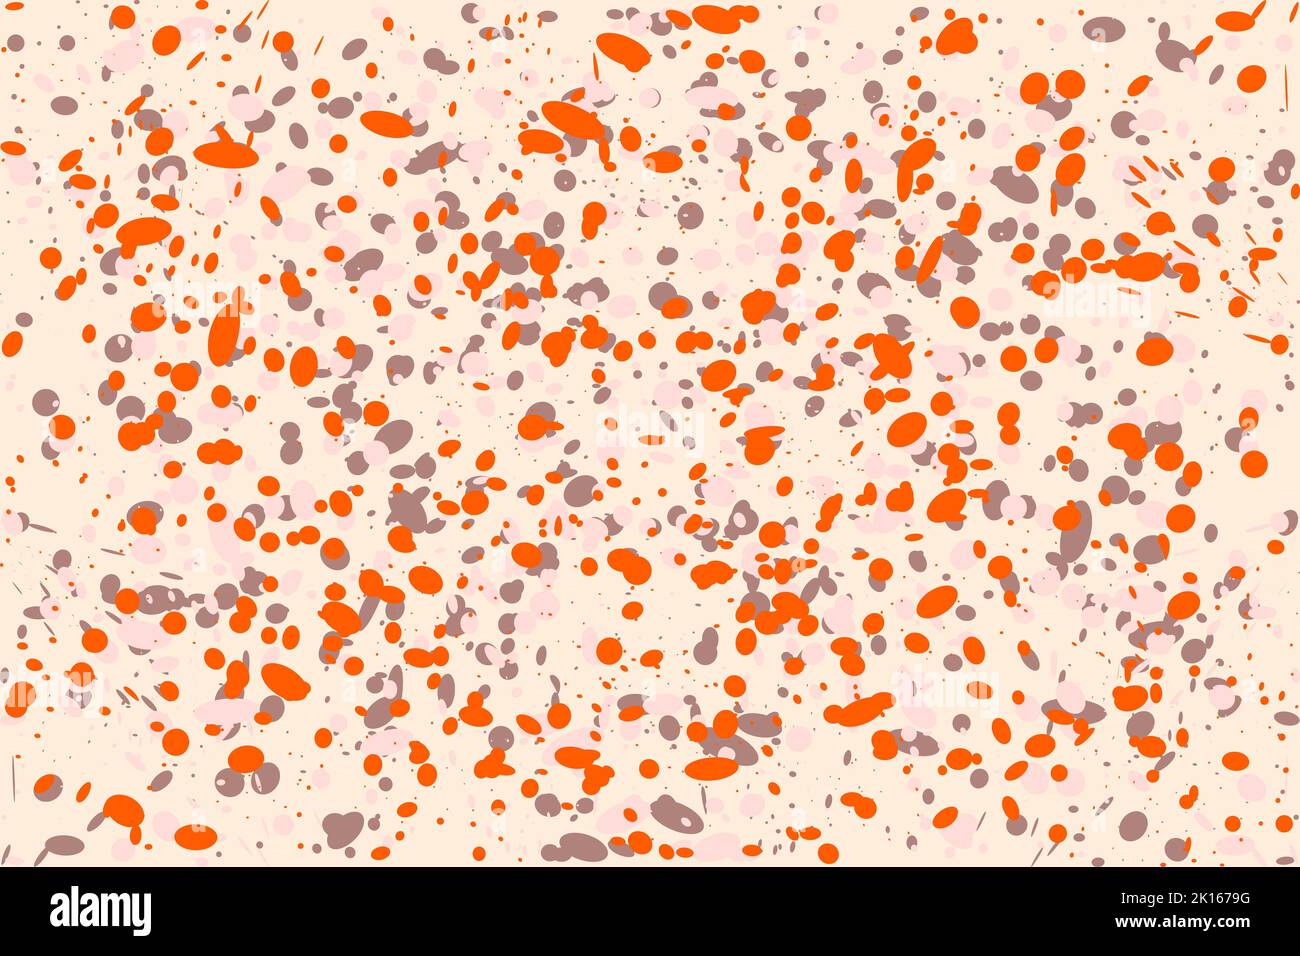 Colorful Abstract background made of paint droplets, blots and splashes. Pink, orange, brown colors. Vector illustration Stock Vector